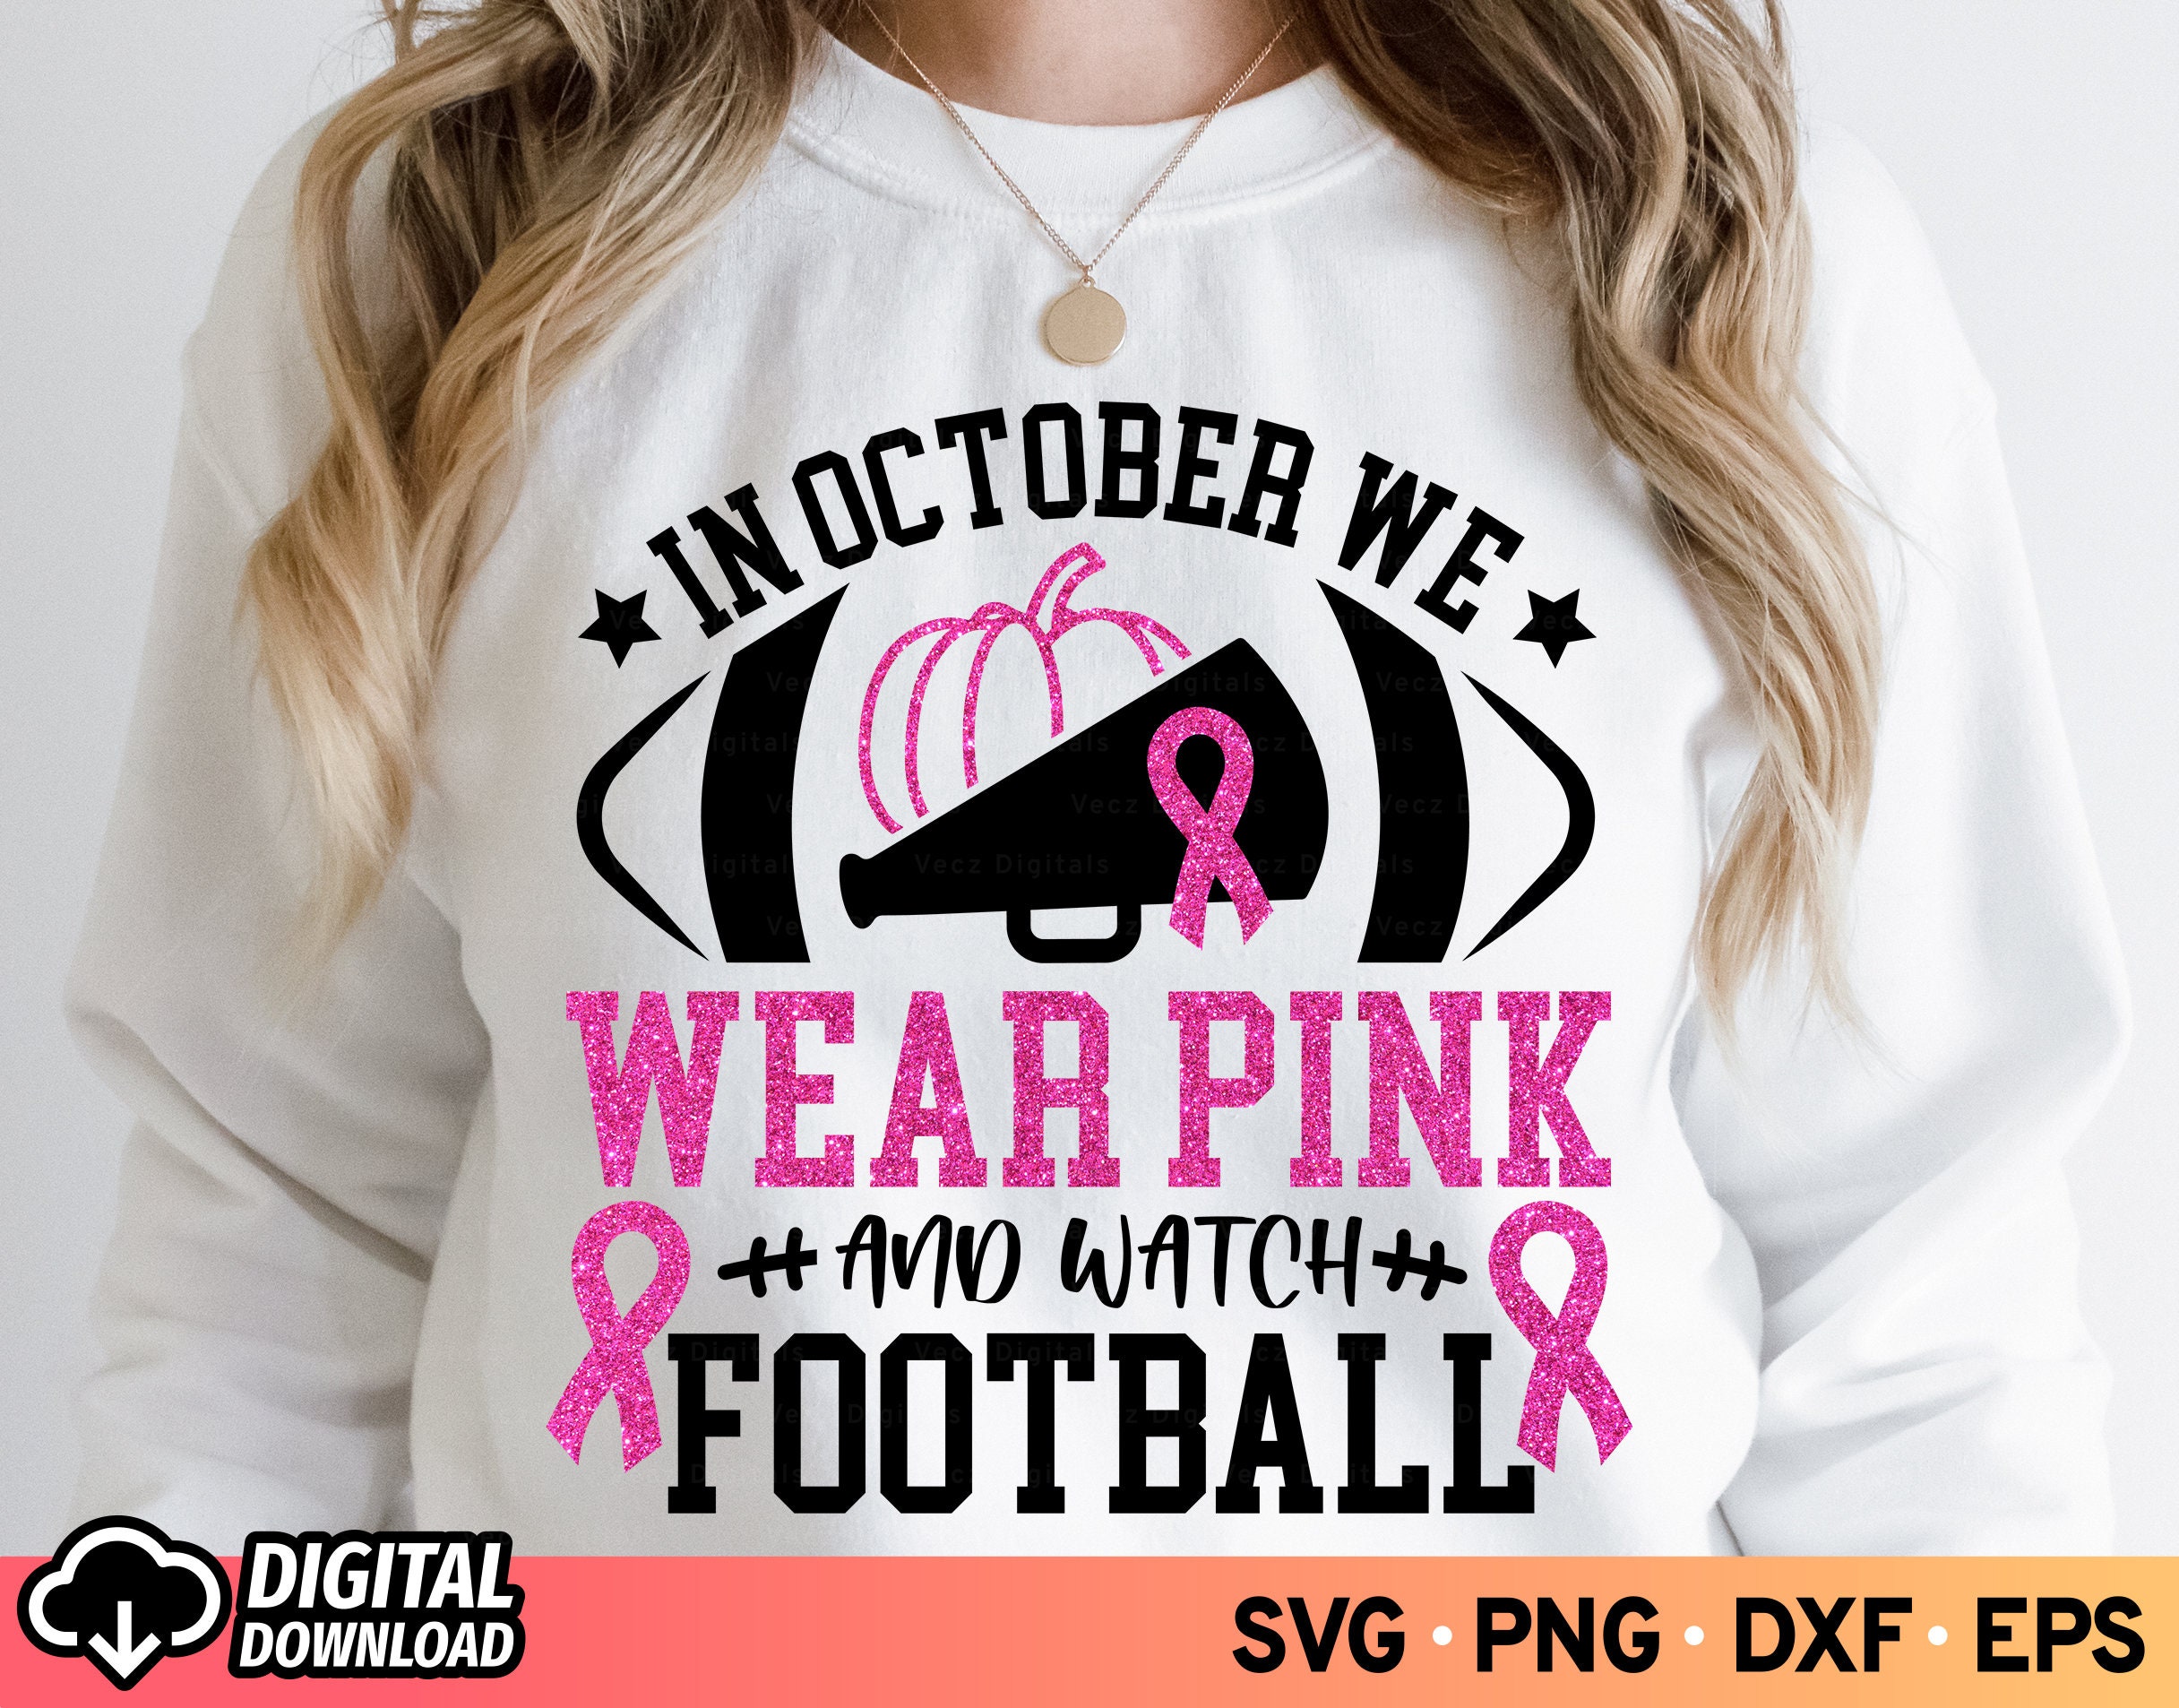 In October We Wear Pink and Watch Football Design SVG Fight - Etsy